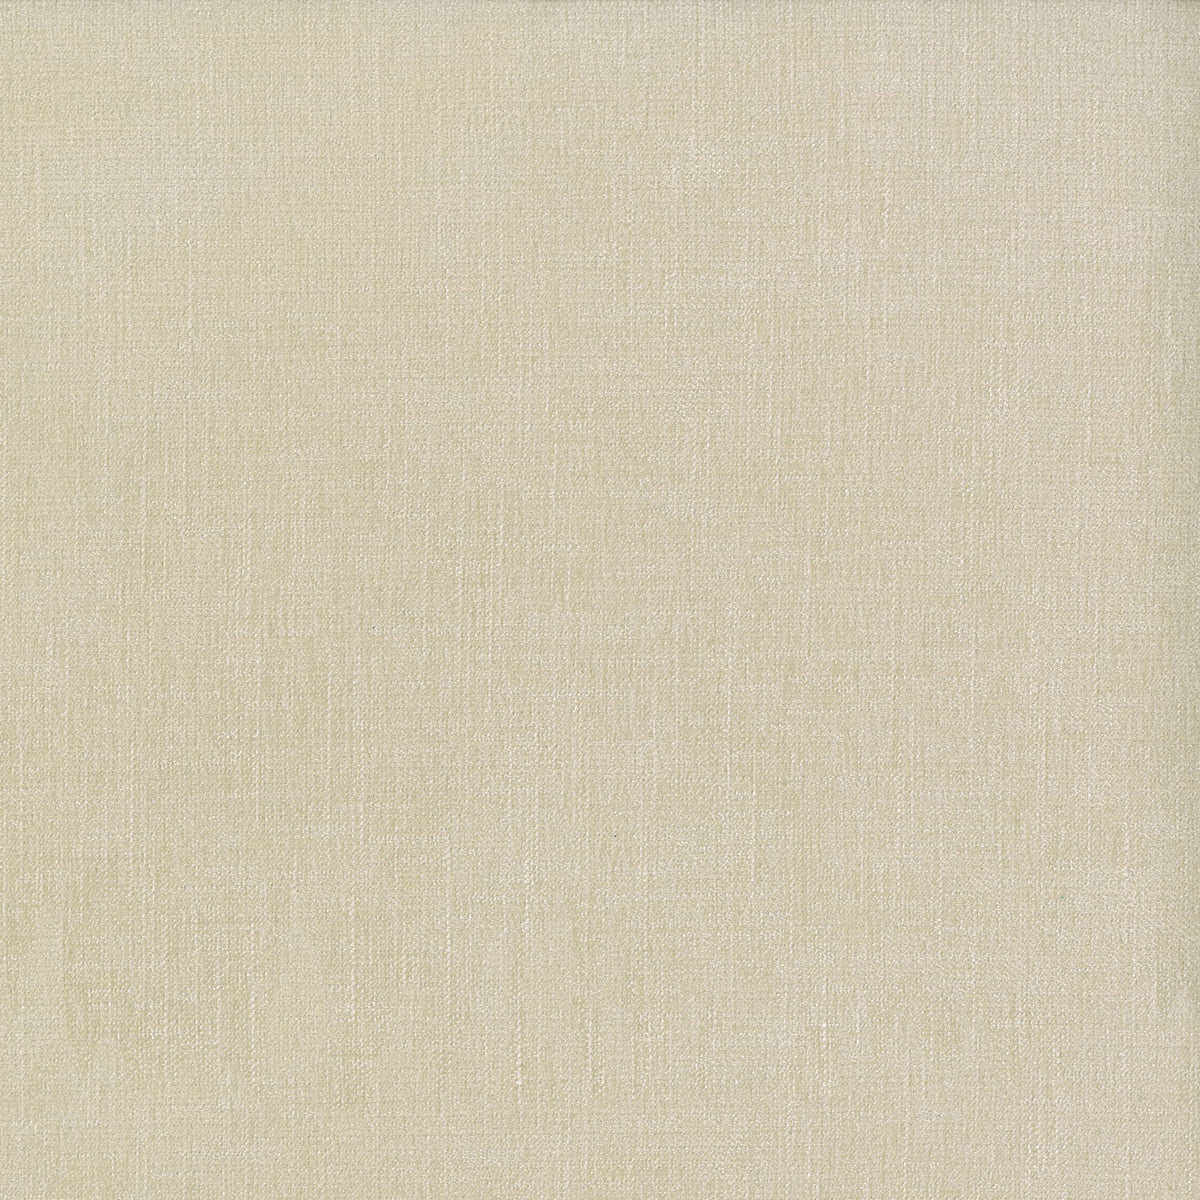 Performance + Remy - Cream 409425 Upholstery Fabric